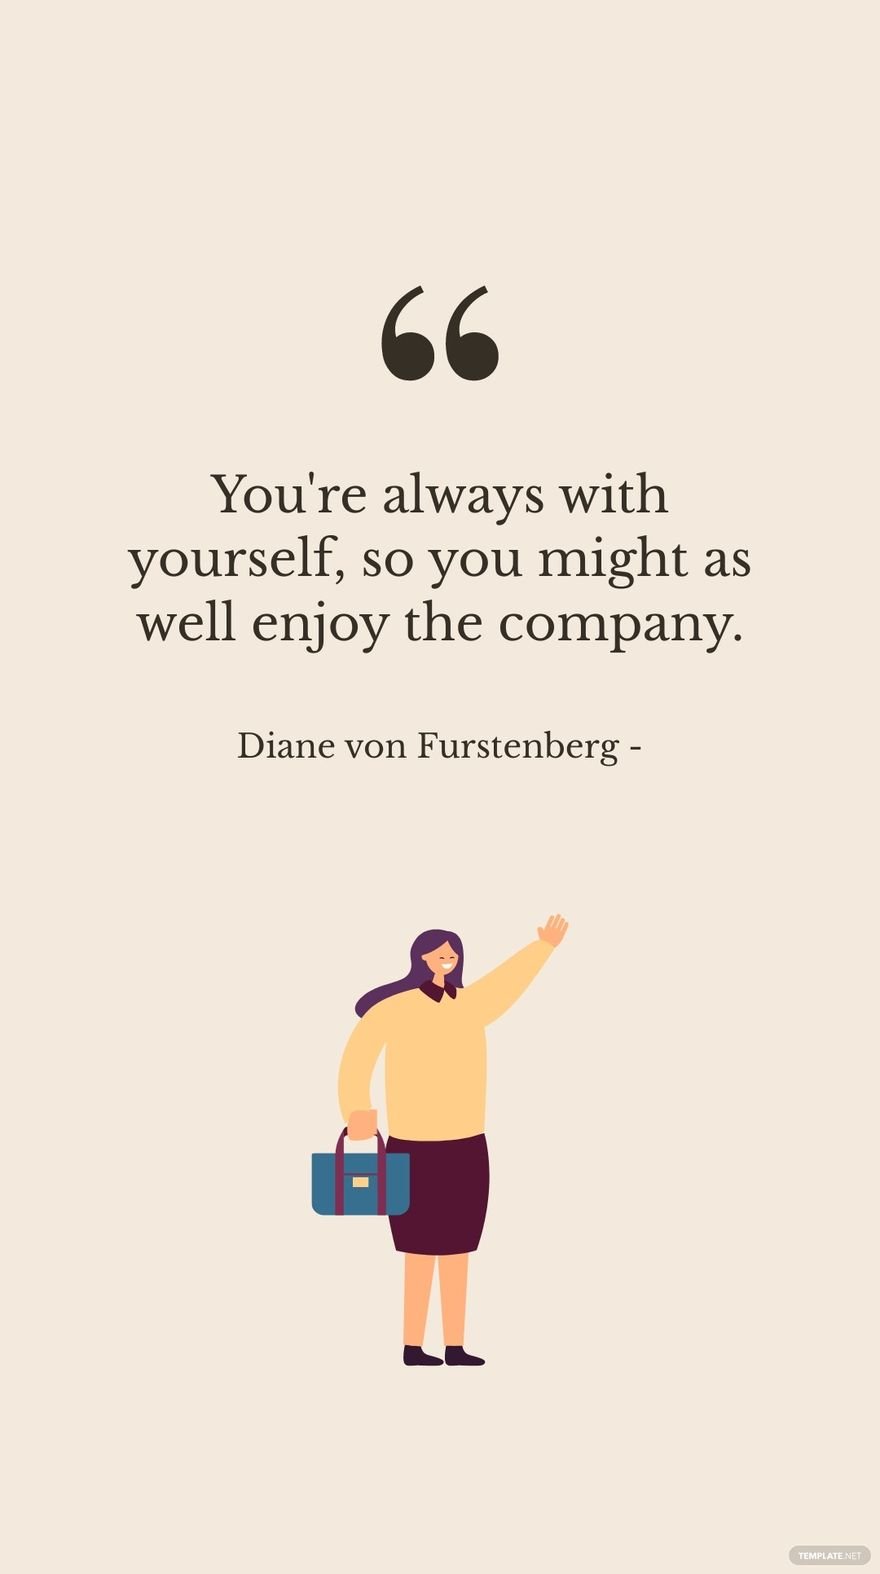 Diane von Furstenberg - You're always with yourself, so you might as well enjoy the company.